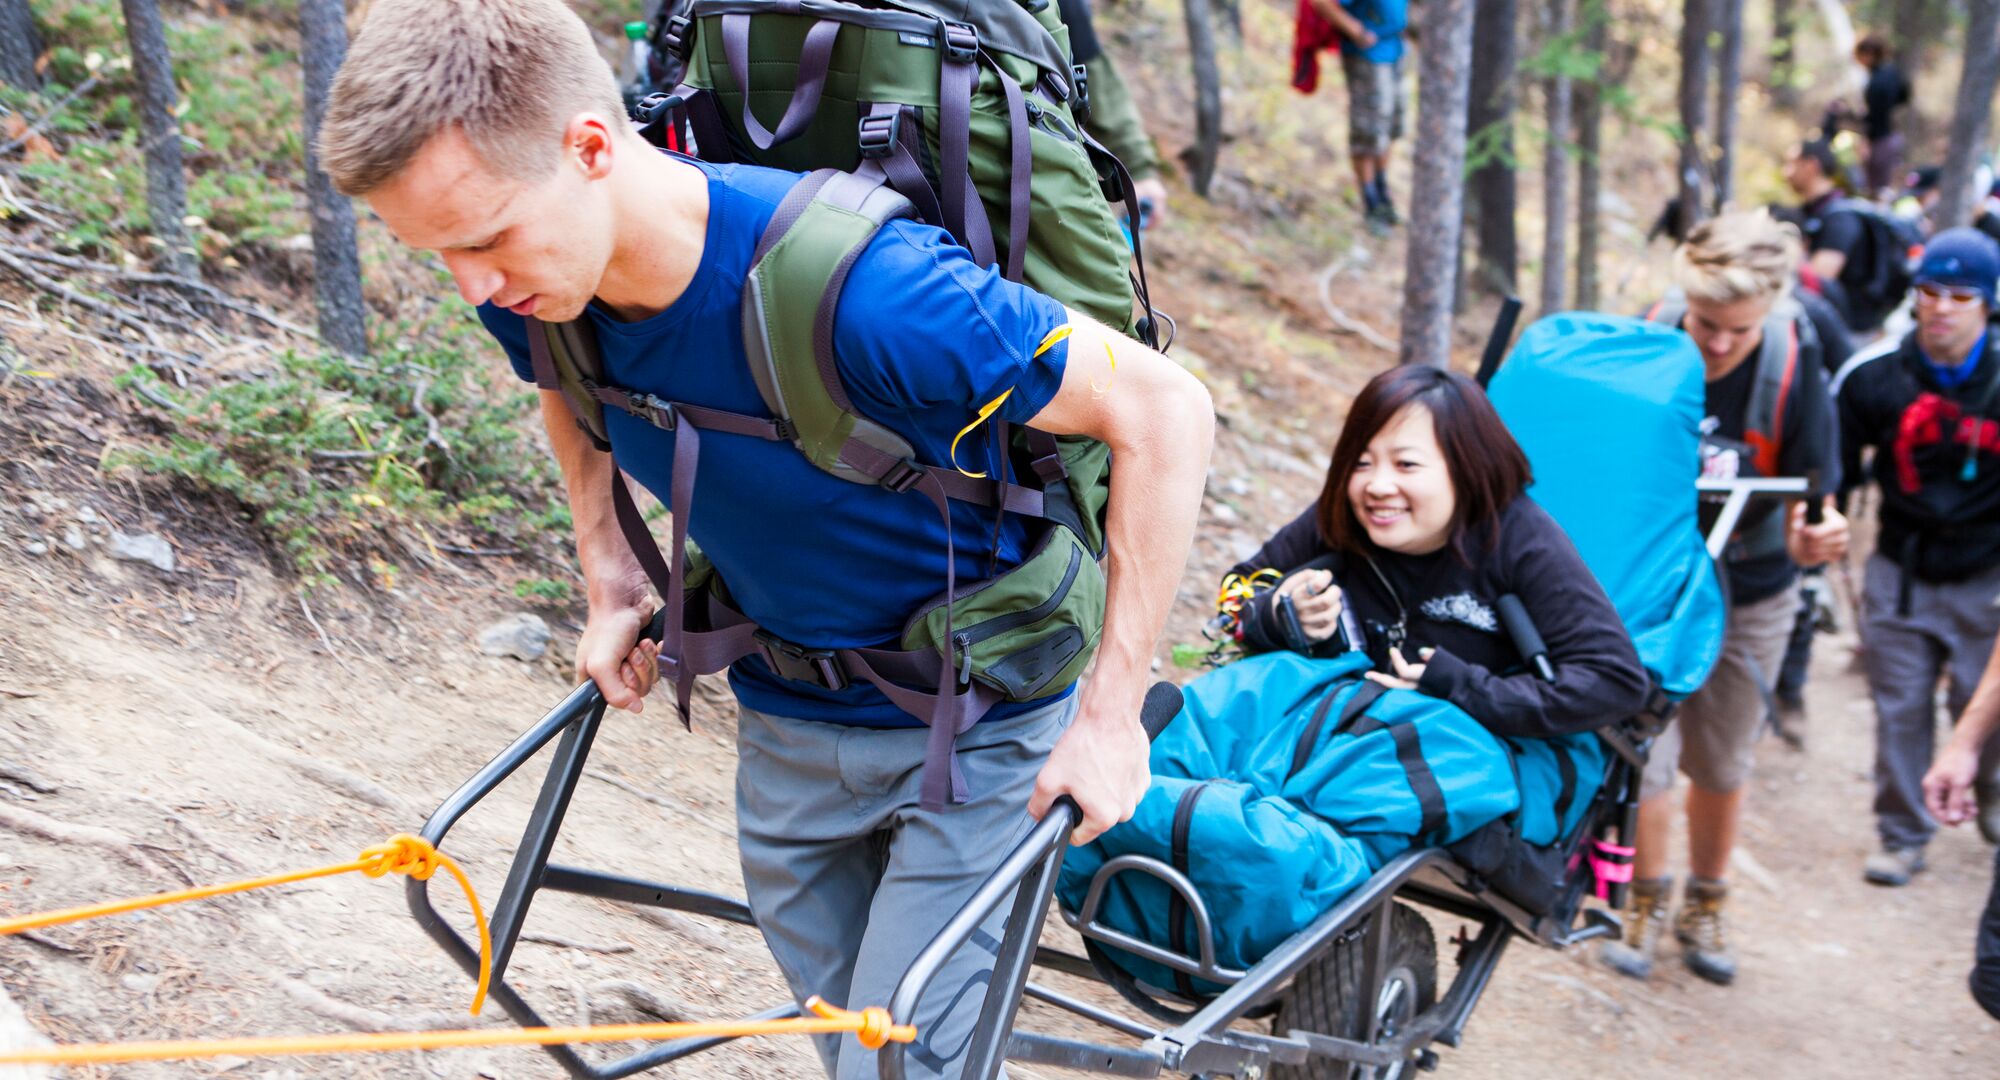 A group of people hiking on a trail assisting a person with disability on the trail